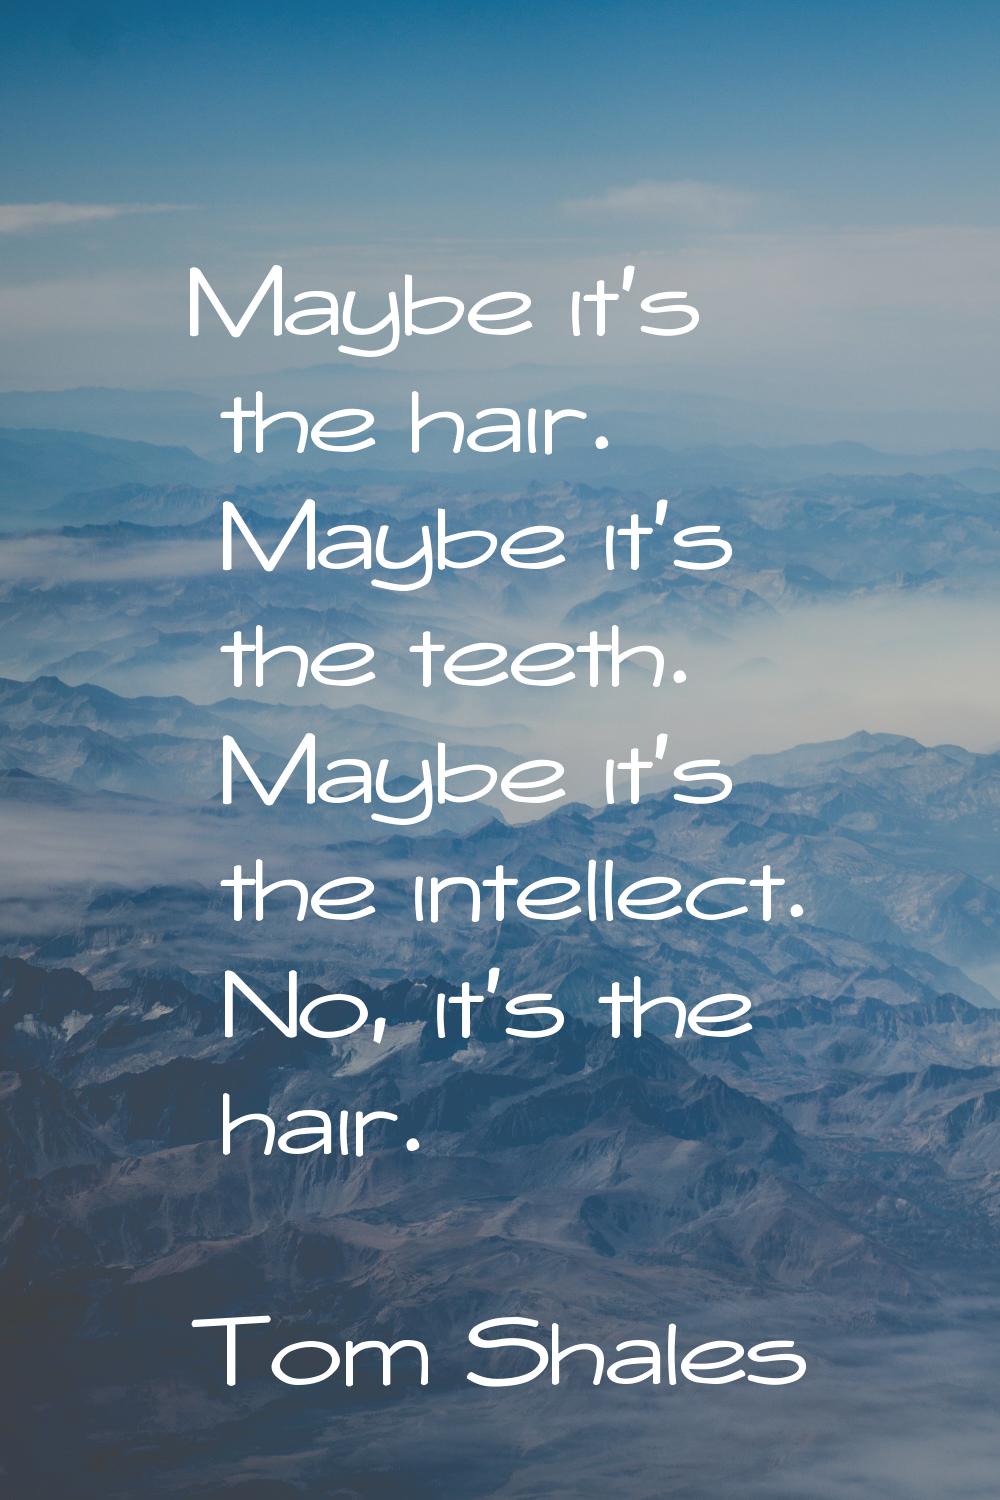 Maybe it's the hair. Maybe it's the teeth. Maybe it's the intellect. No, it's the hair.